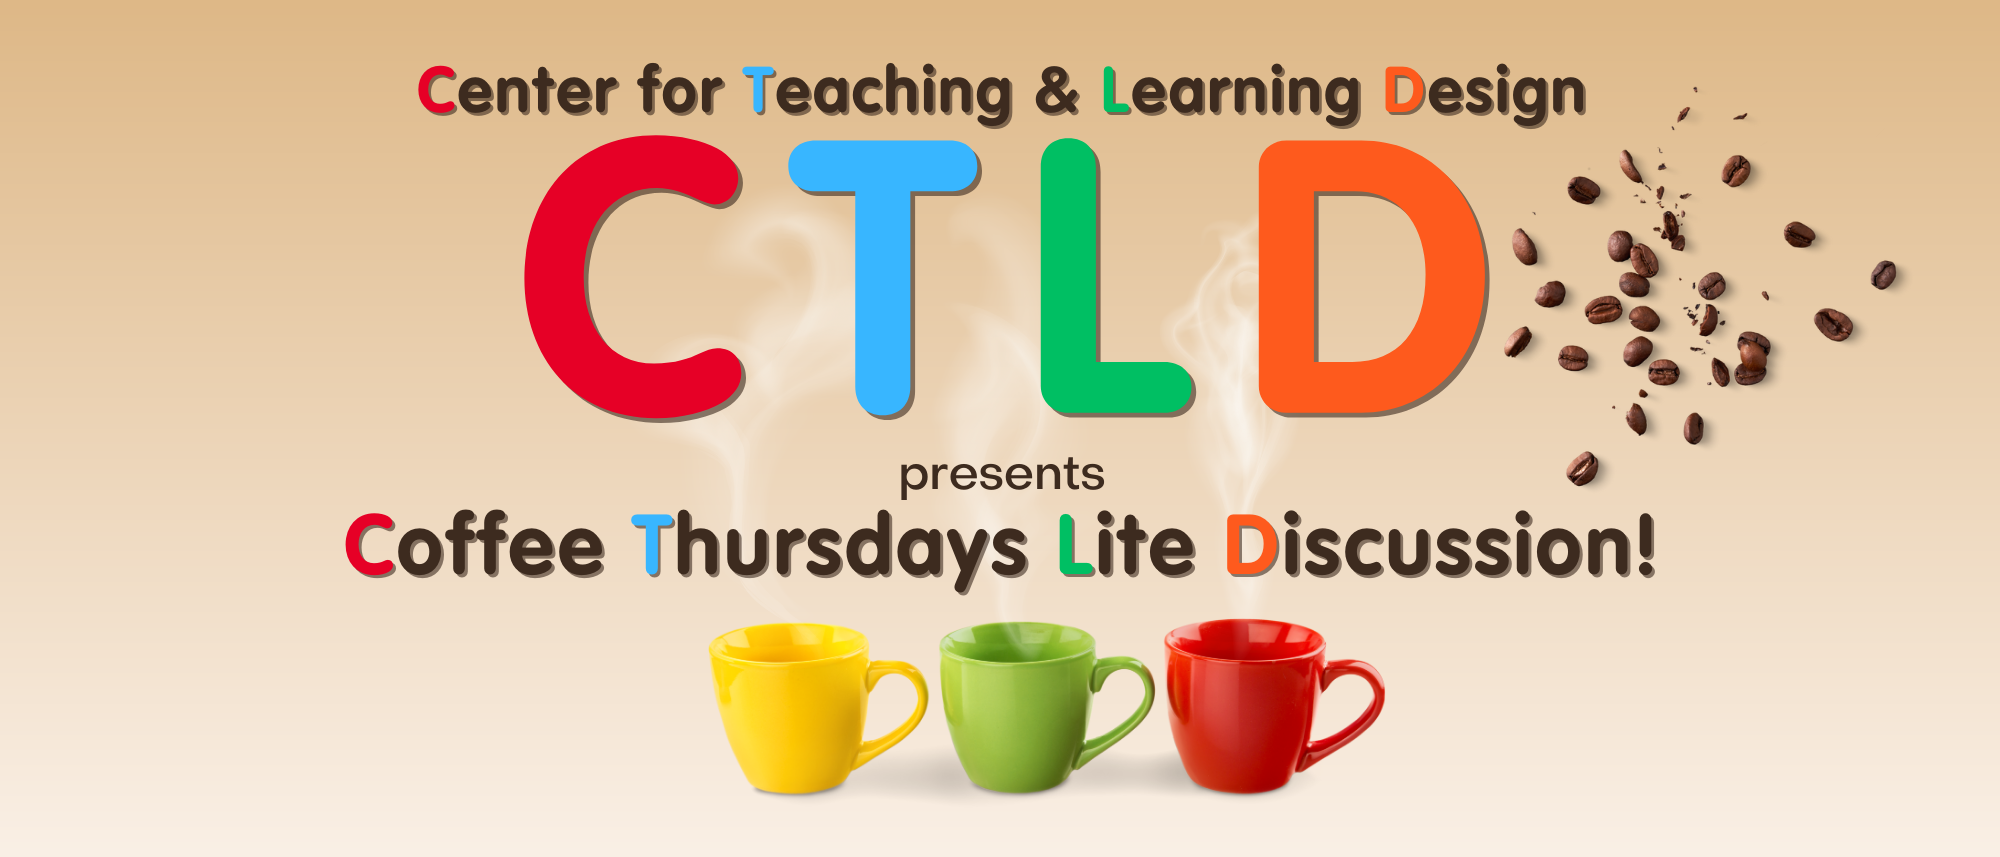 CTLD Coffee House Thursday - 9 to 11:30 am